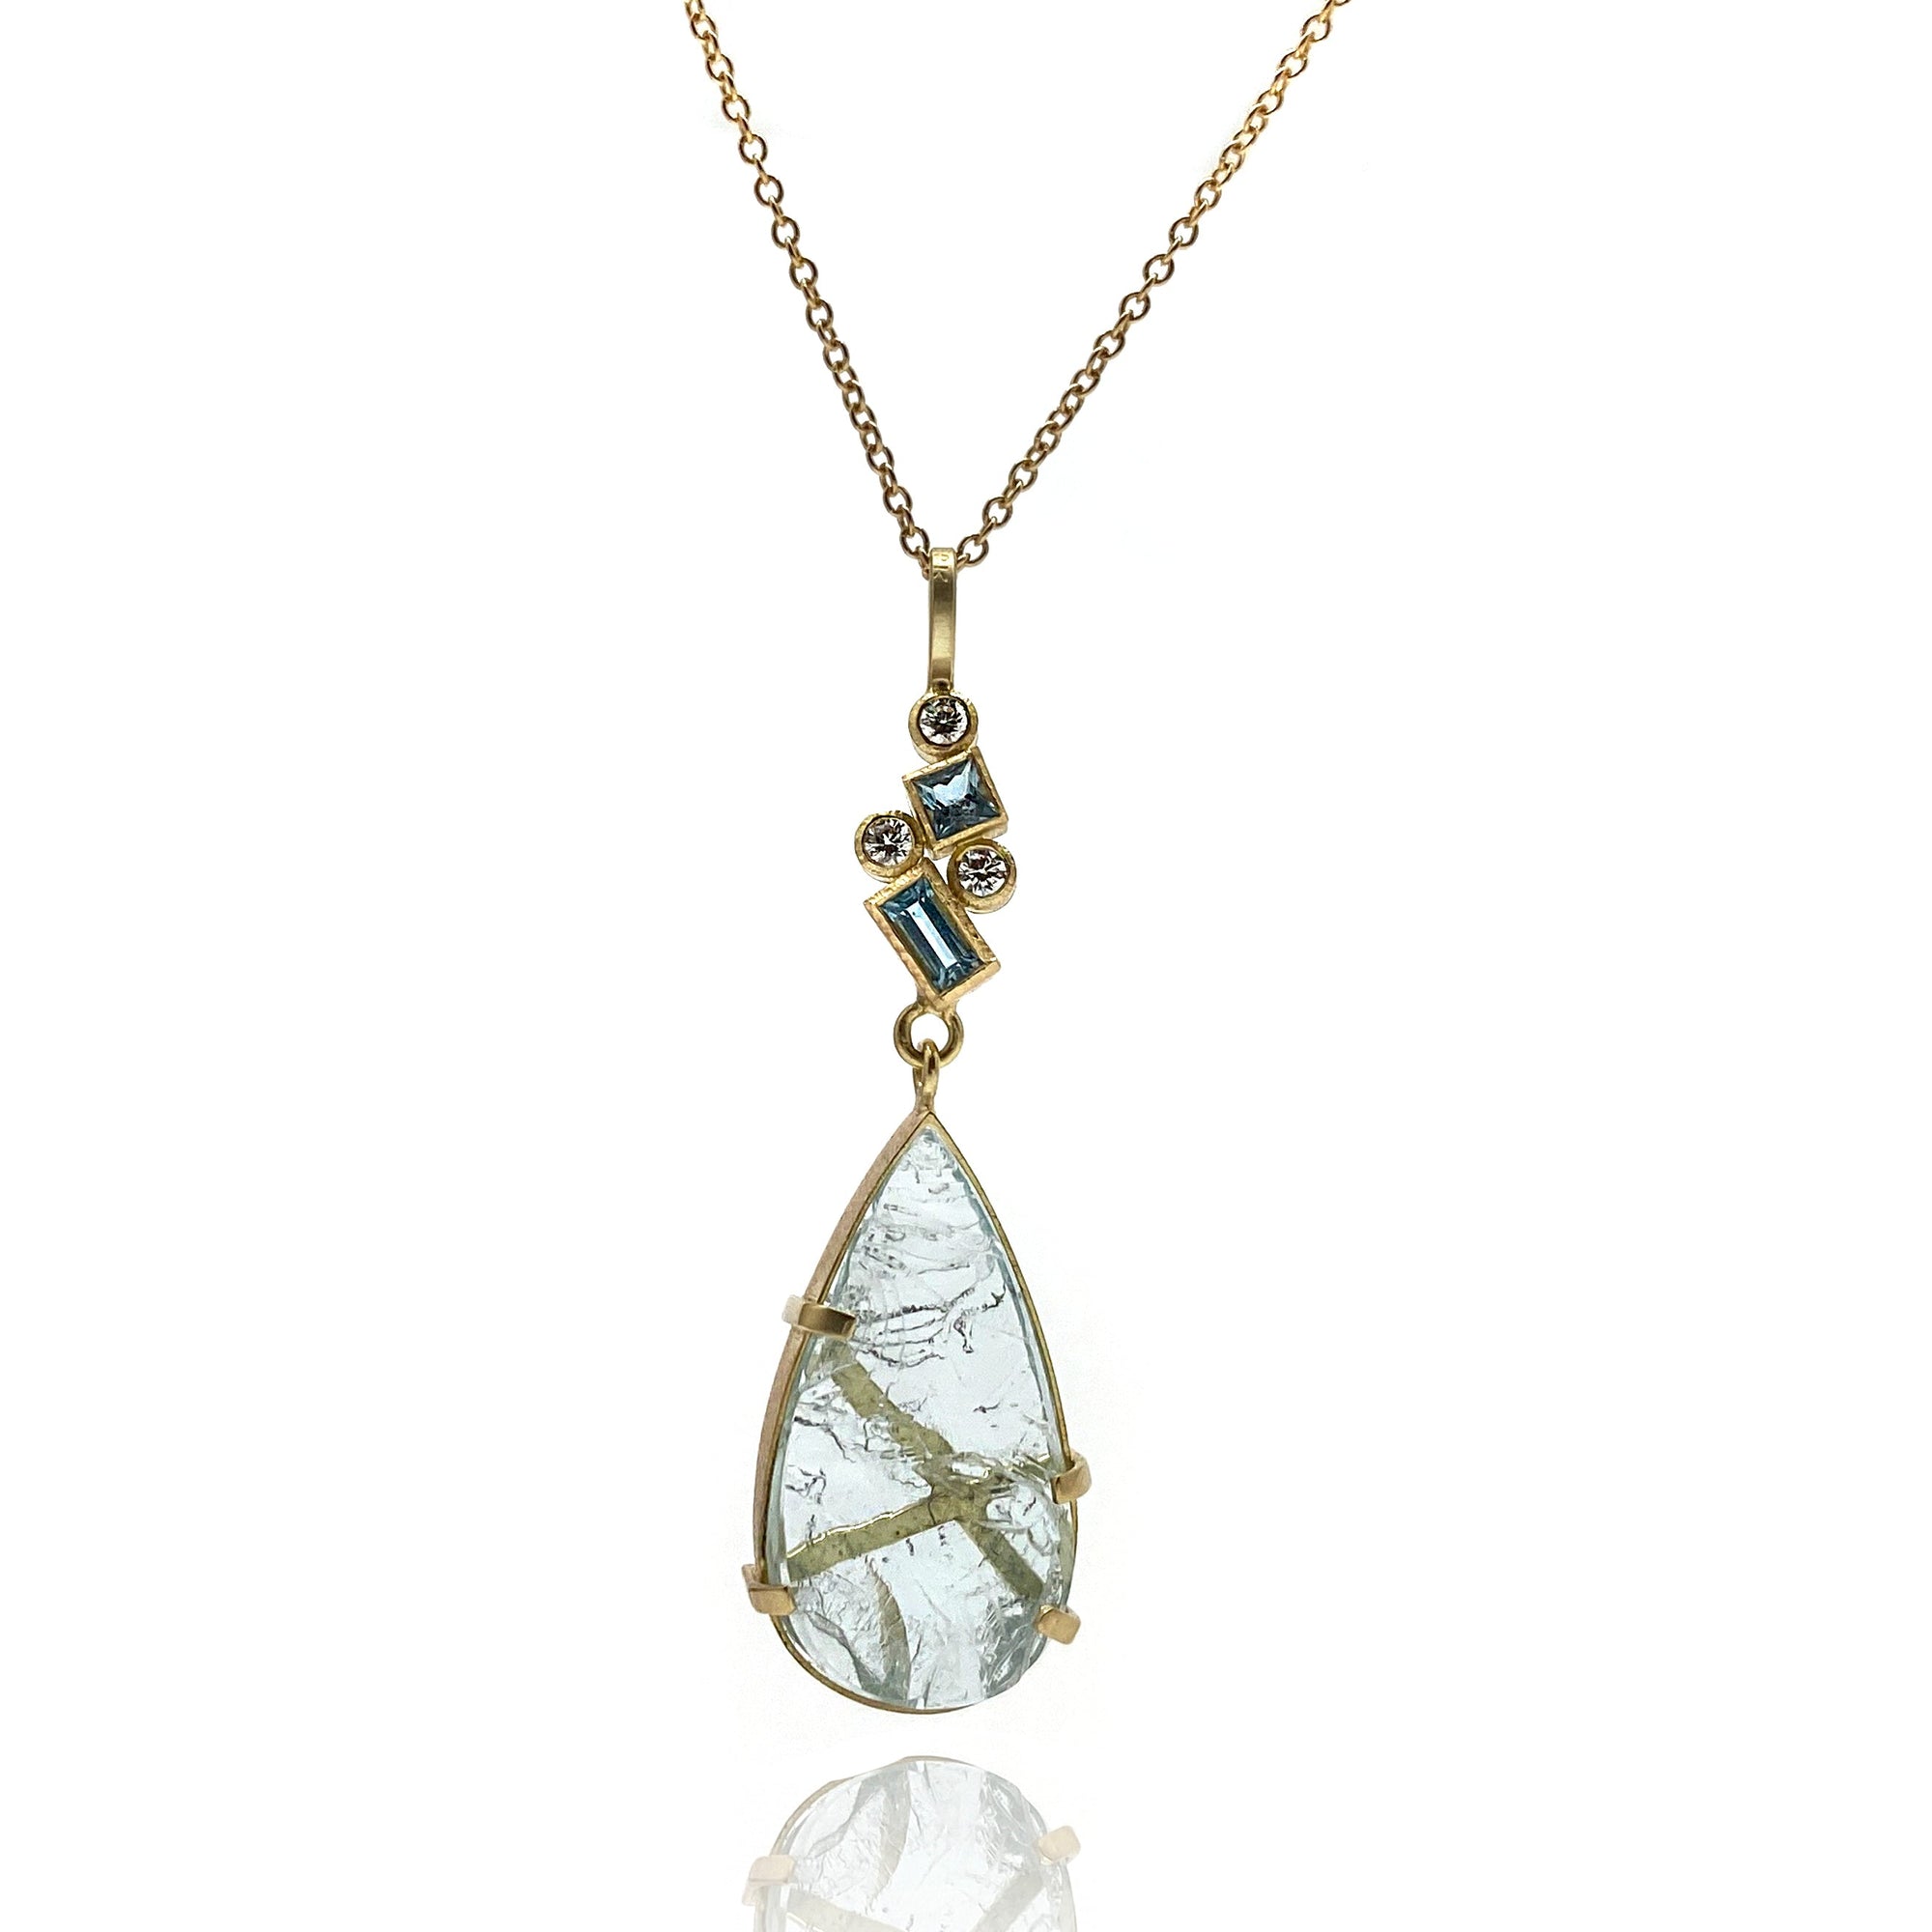 One of a Kind Aquamarine Drop Confetti Necklace-Necklaces-Karin Jacobson-Pistachios